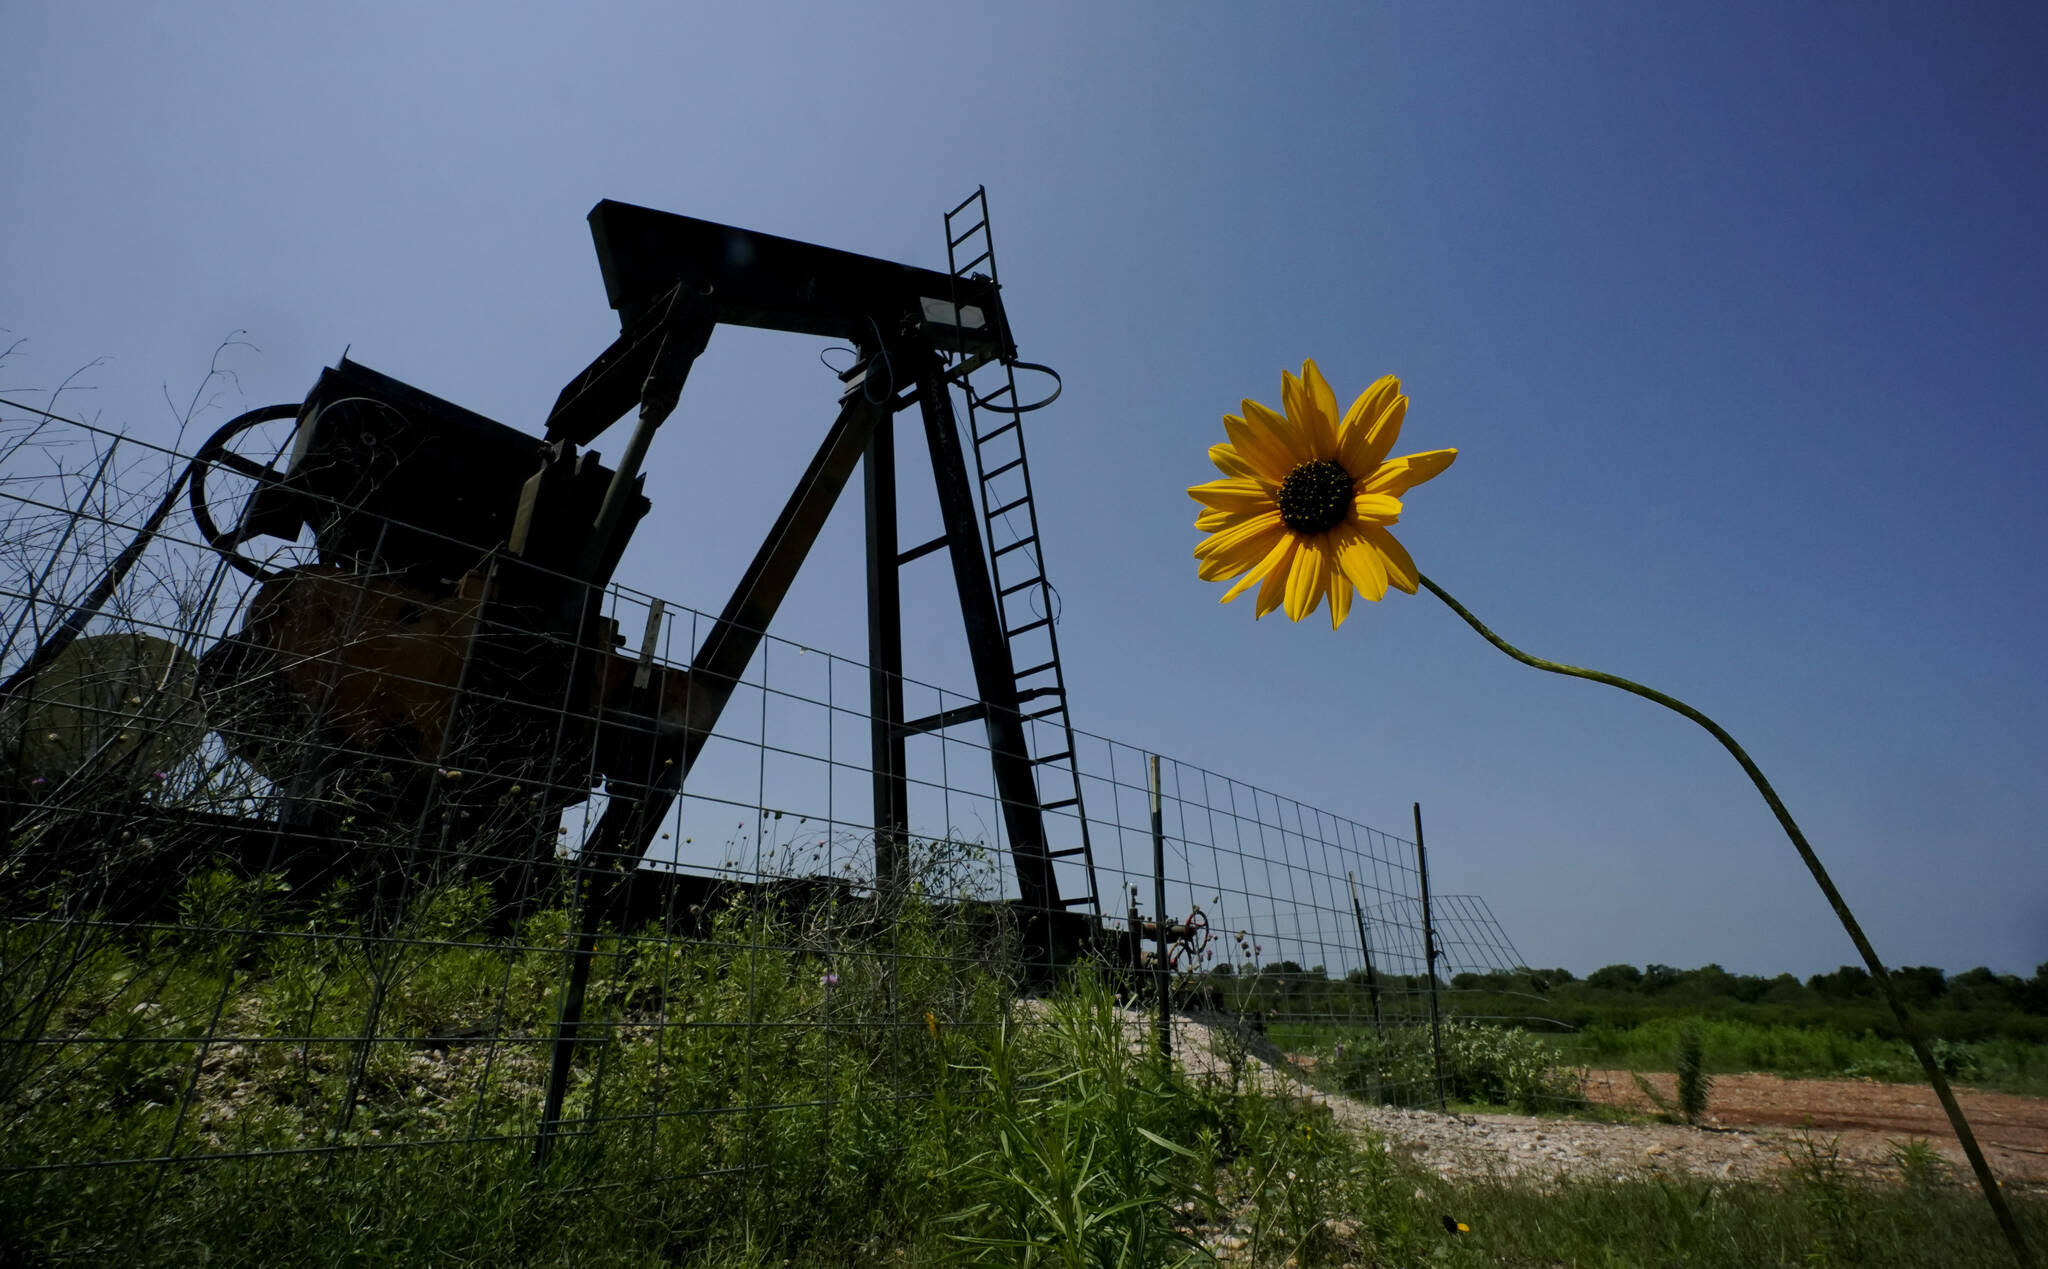 AP Photo/Eric Gay
A wildflower blows in the wind near an old pump jack on Molly Rooke’s ranch May 18, 2021, near Refugio, Texas. Oil and gas drilling began on the ranch in the 1920s and there were dozens of orphaned wells that needed to be plugged for safety and environmental protection. According to the U.S. Department of the Interior, Alaska will receive more than $32 million for cleanup efforts.